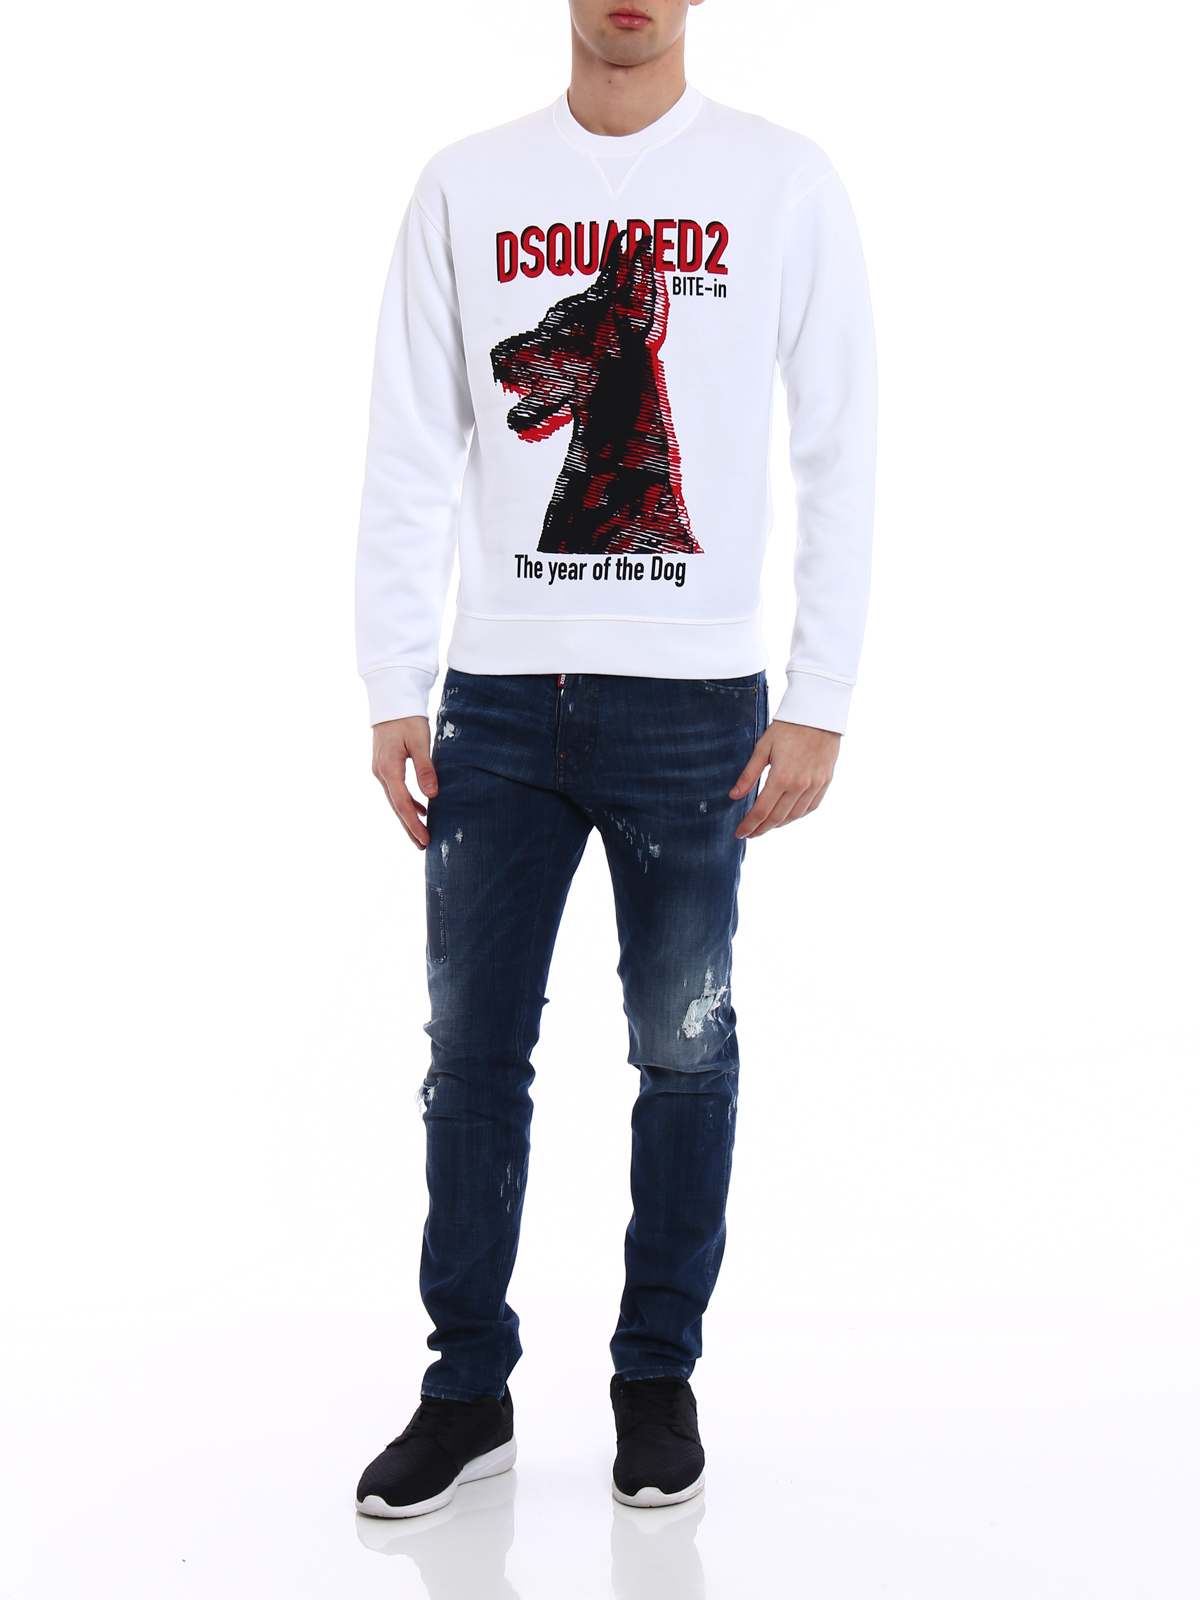 dsquared the year of the dog